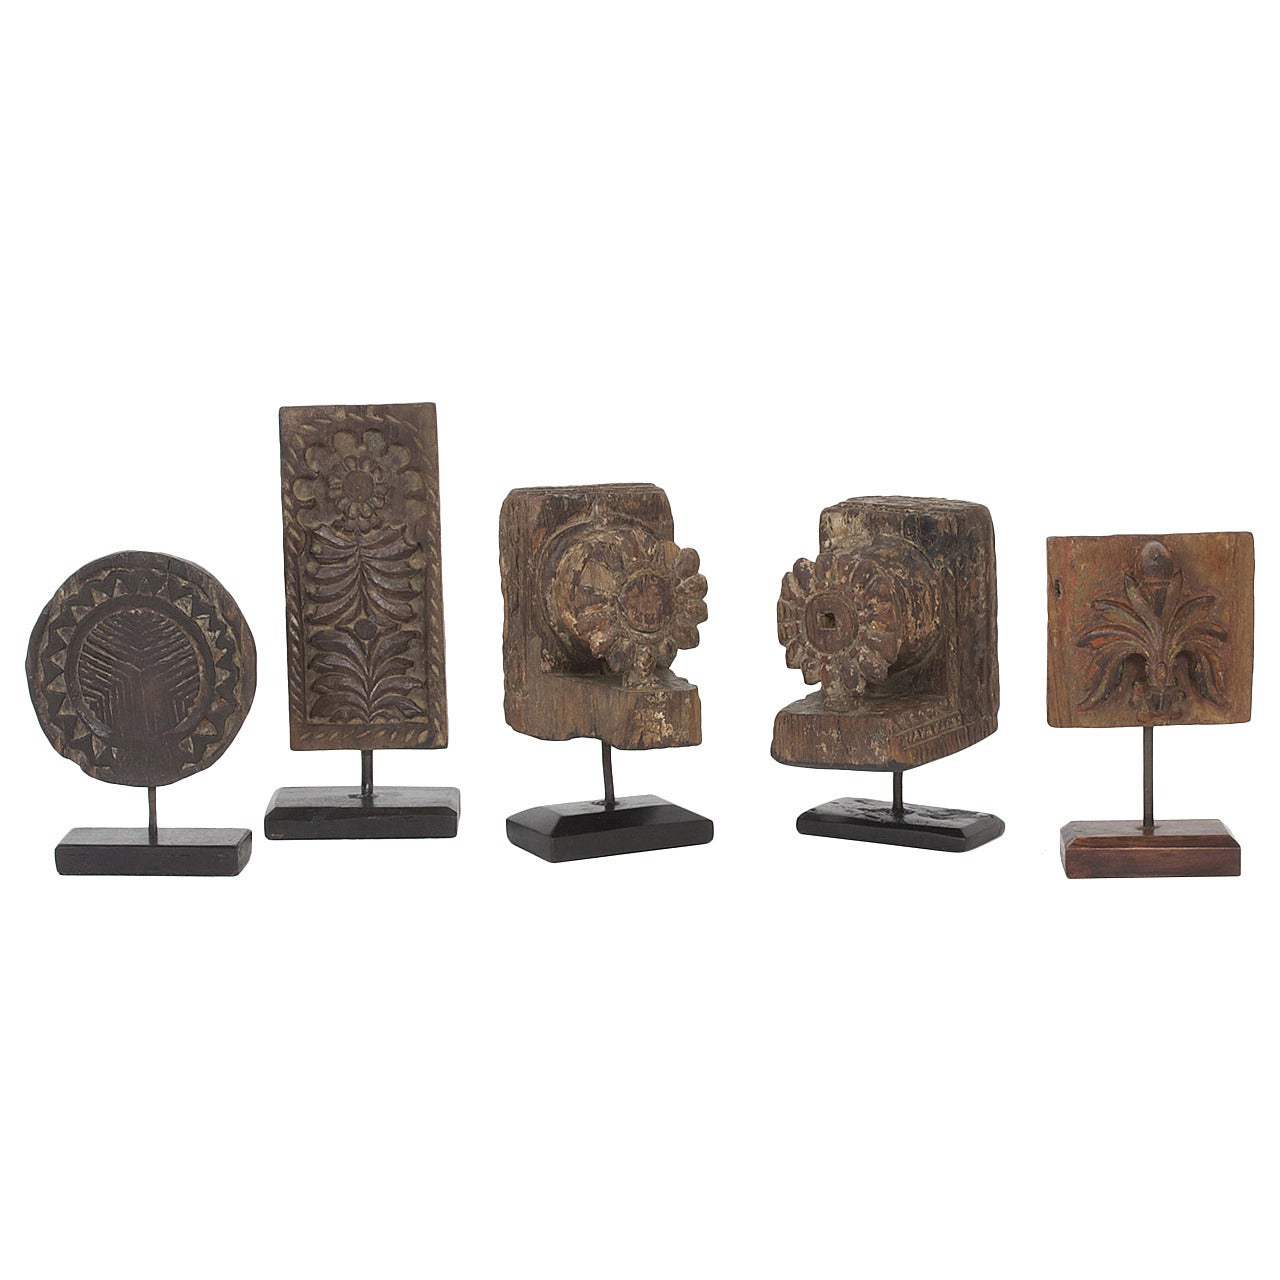 Group of Five Architectural Relics or Ornaments